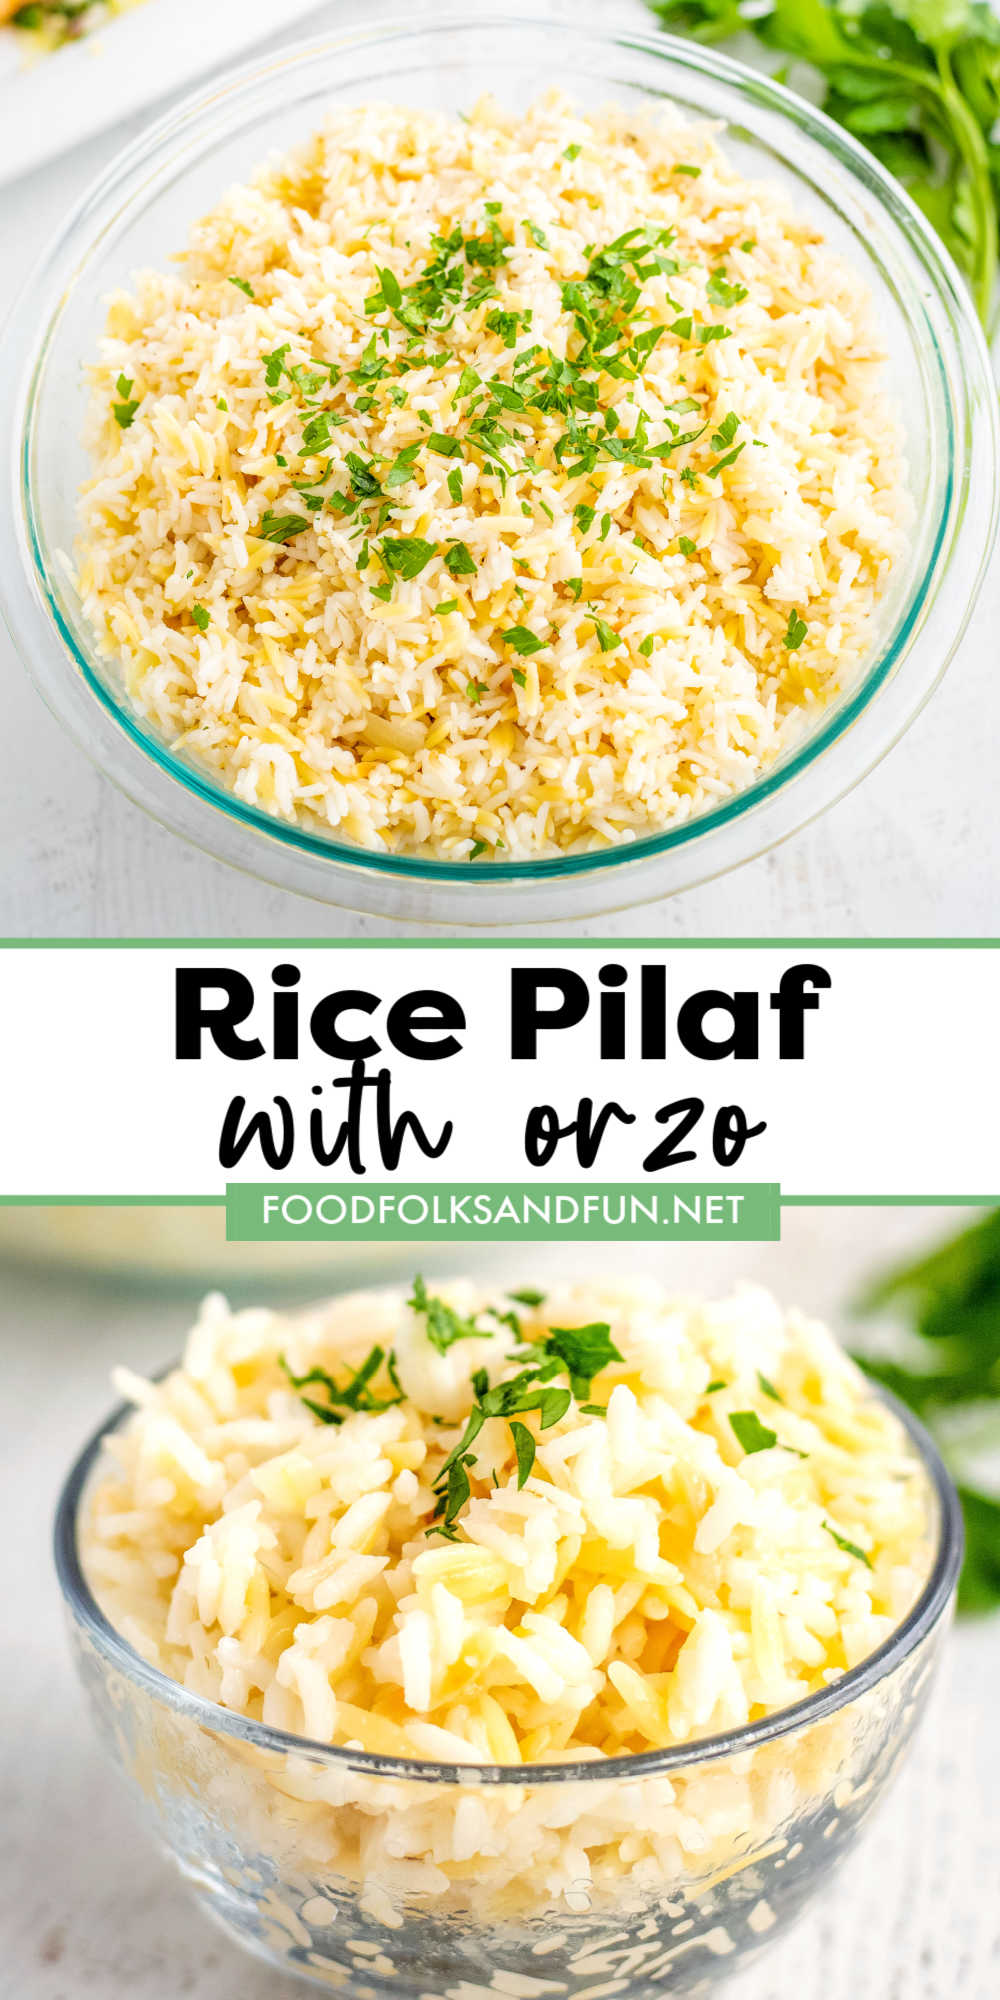 This Rice Pilaf with Orzo recipe is your new favorite side dish. It is super simple to make, but it is easy to customize with my four pilaf variations for any meal or season. via @foodfolksandfun